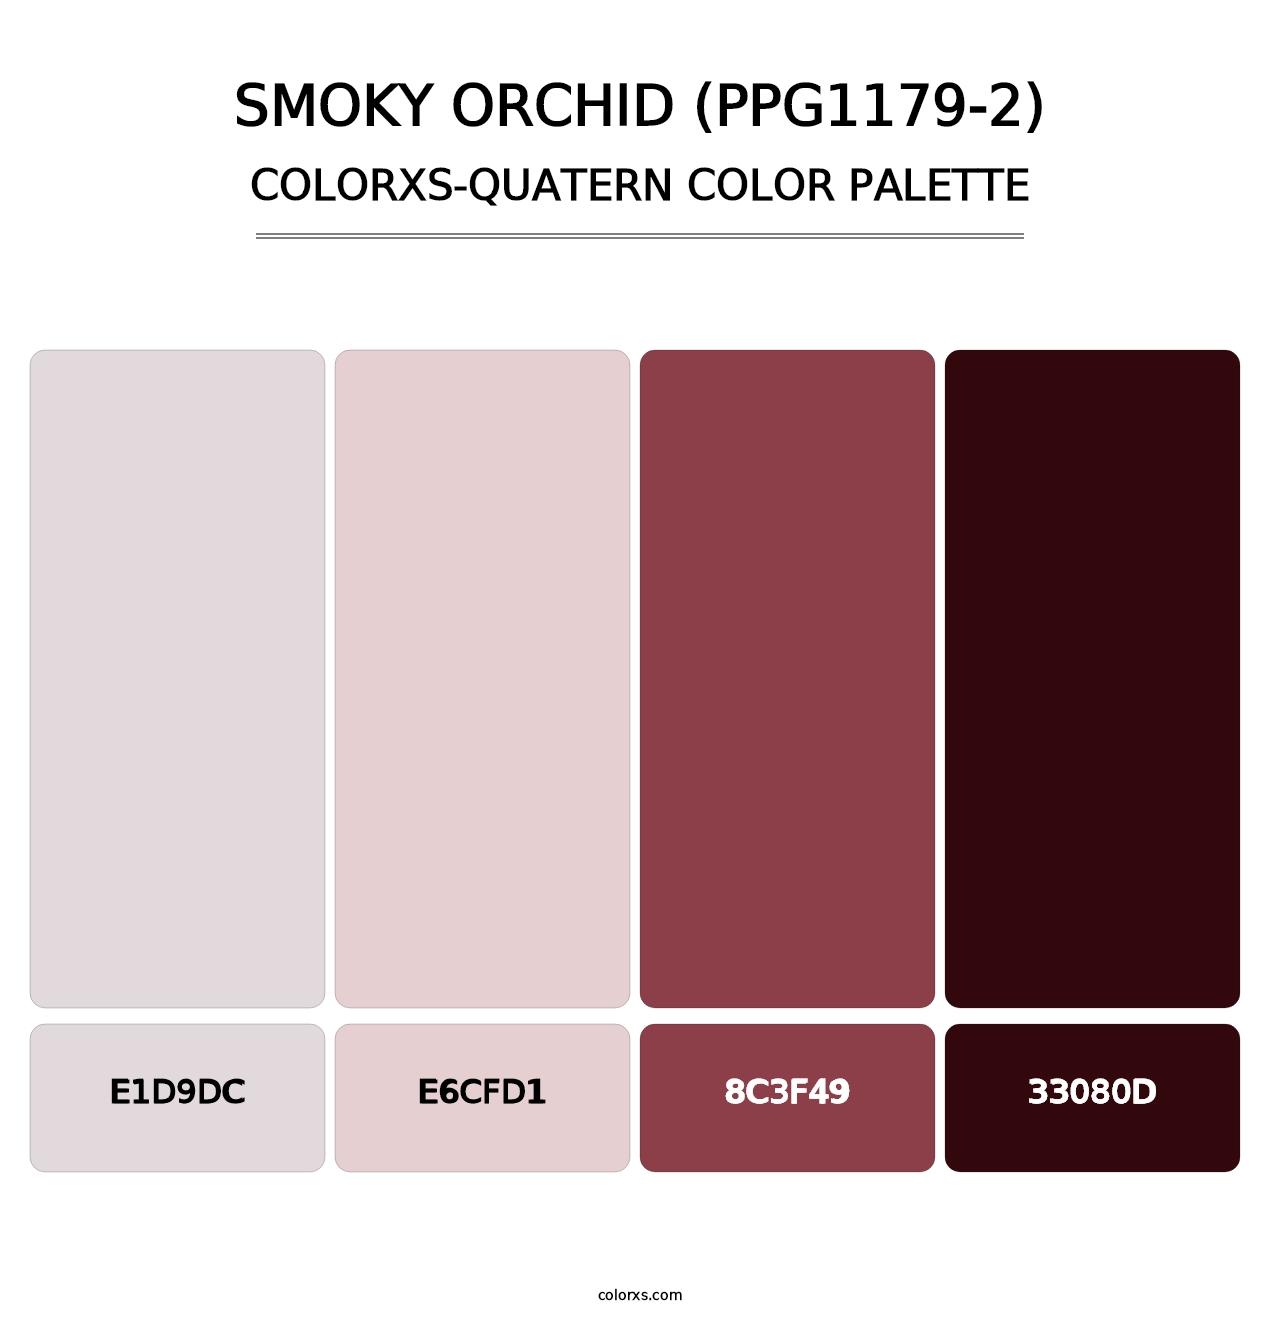 Smoky Orchid (PPG1179-2) - Colorxs Quatern Palette